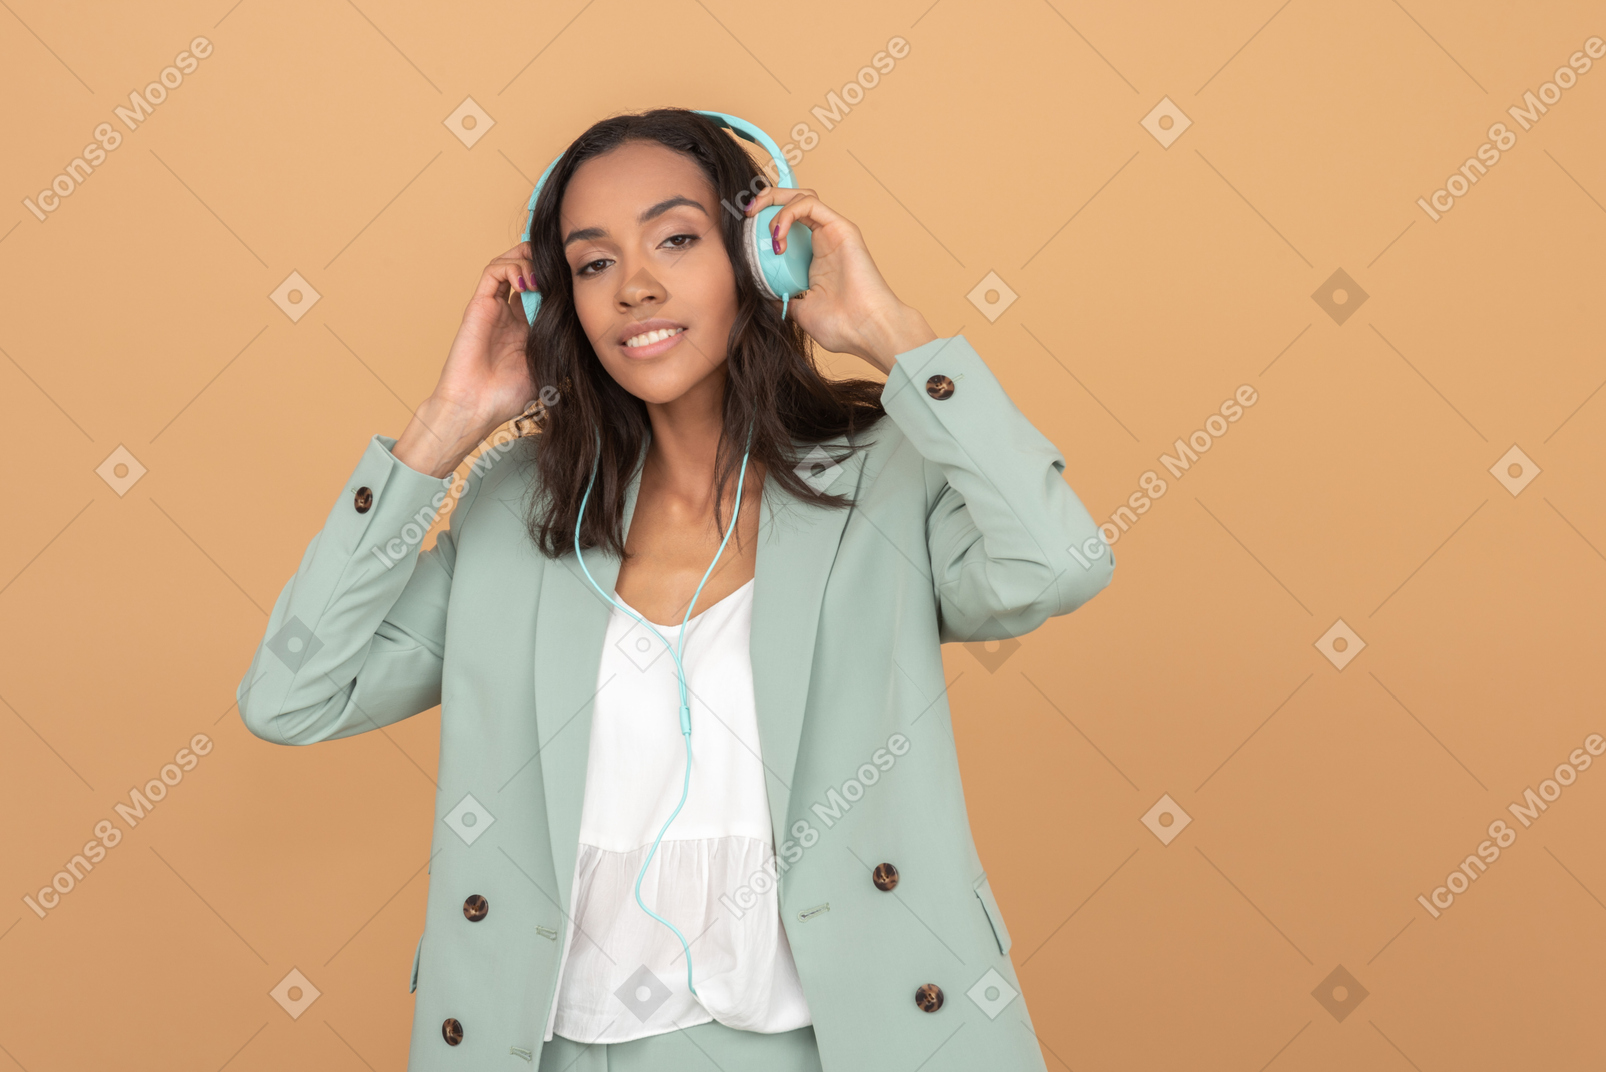 Attractive young girl listening to music in headphones